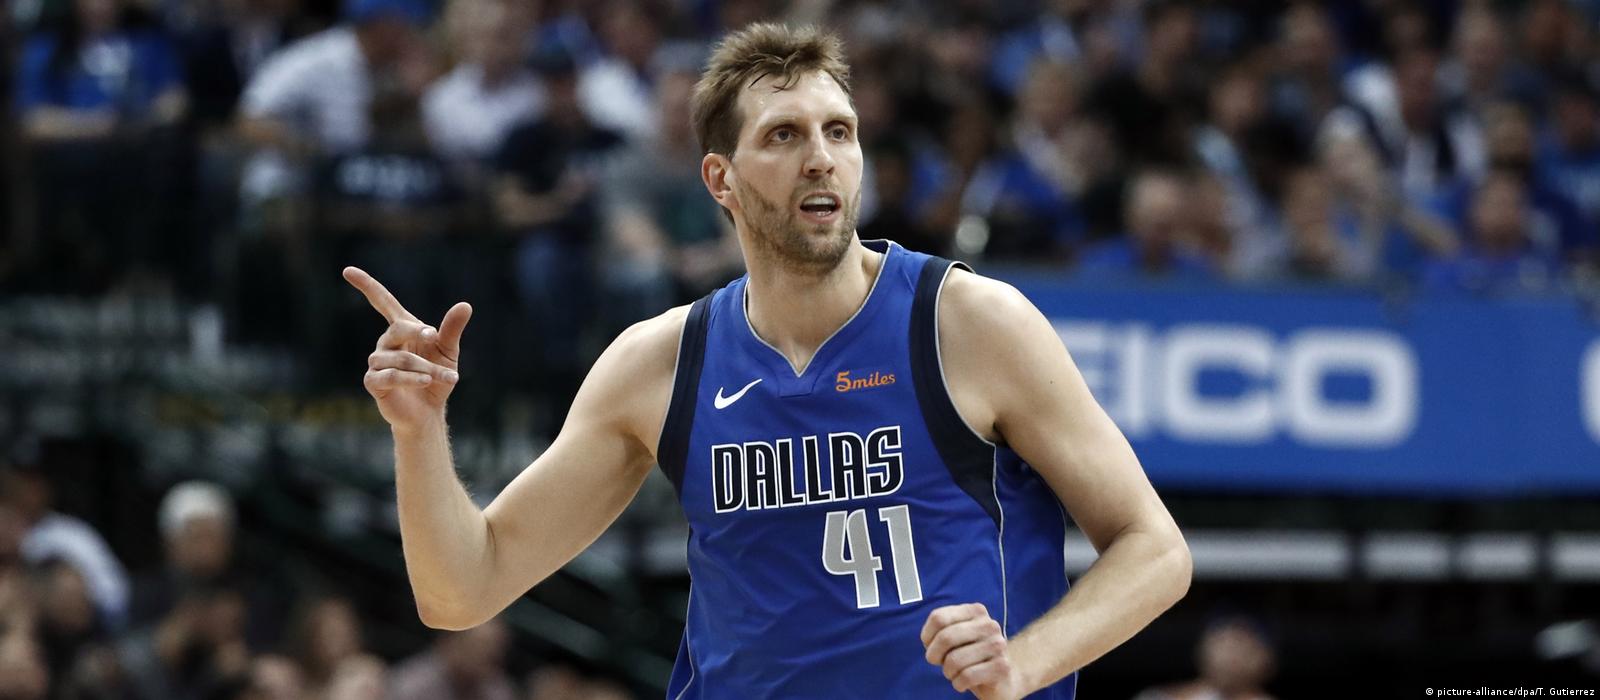 Dirk Nowitzki's number 41 jersey to be retired by Dallas Mavericks